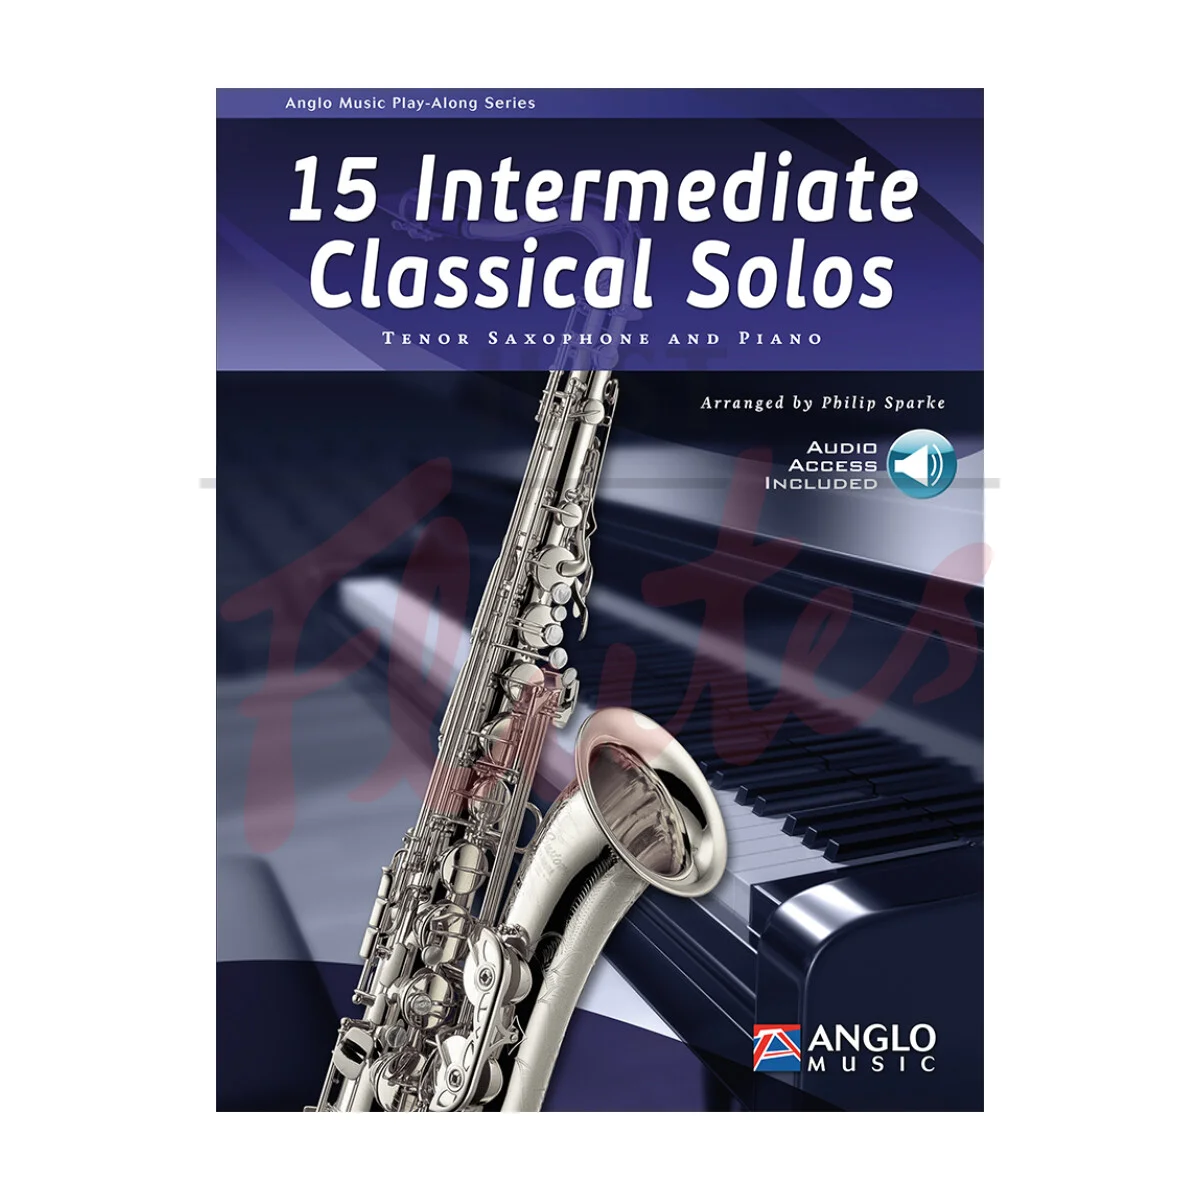 15 Intermediate Classical Solos for Tenor Saxophone and Piano